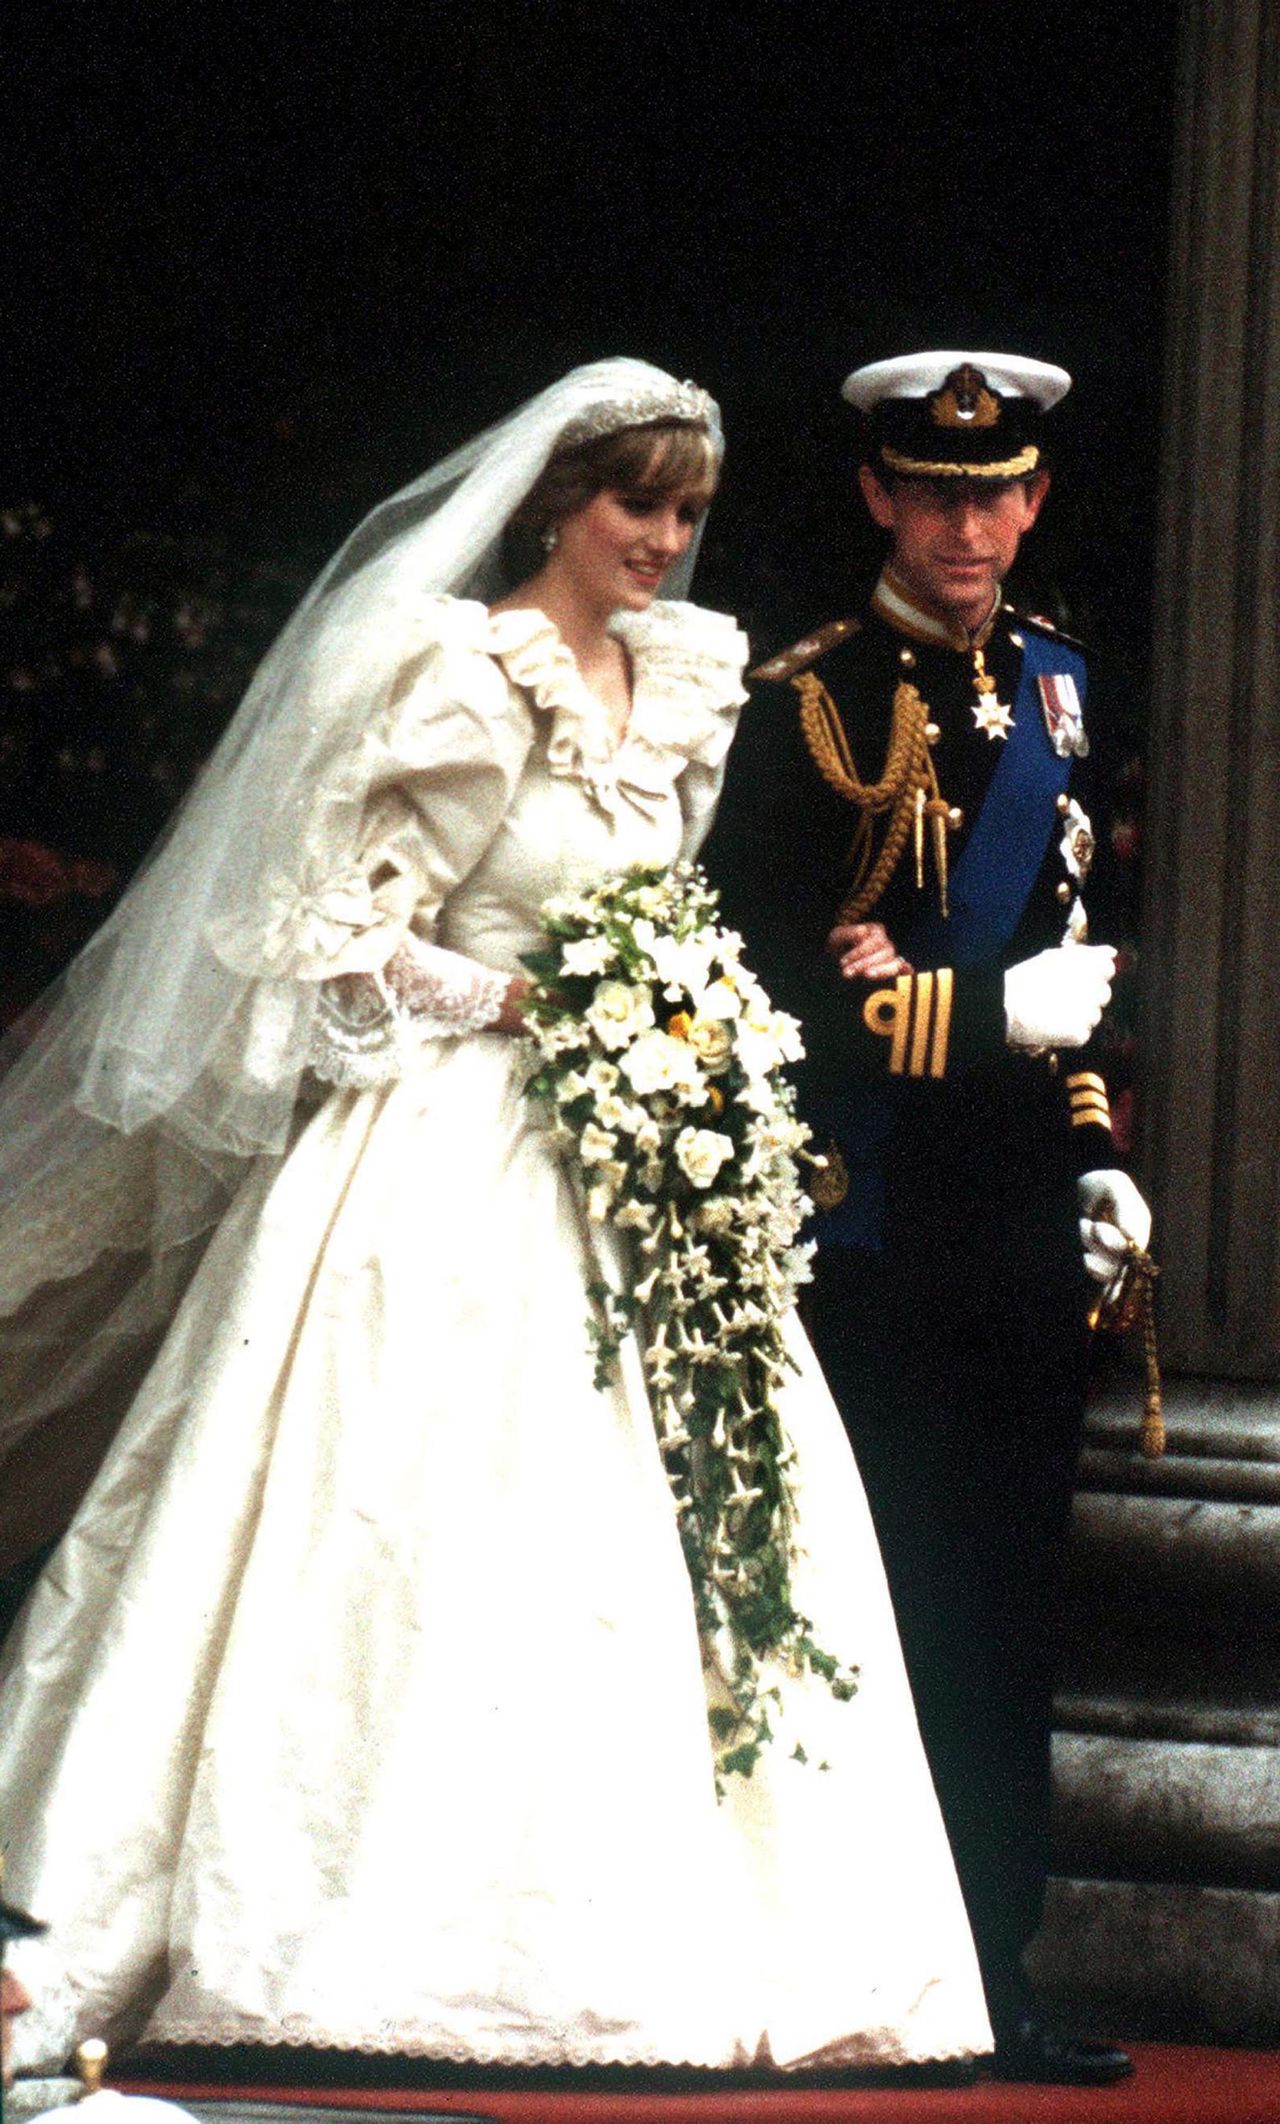 <strong>Princess Diana opted for a dress designed by the Emanuels, while Prince Charles opted to wear military uniform</strong>